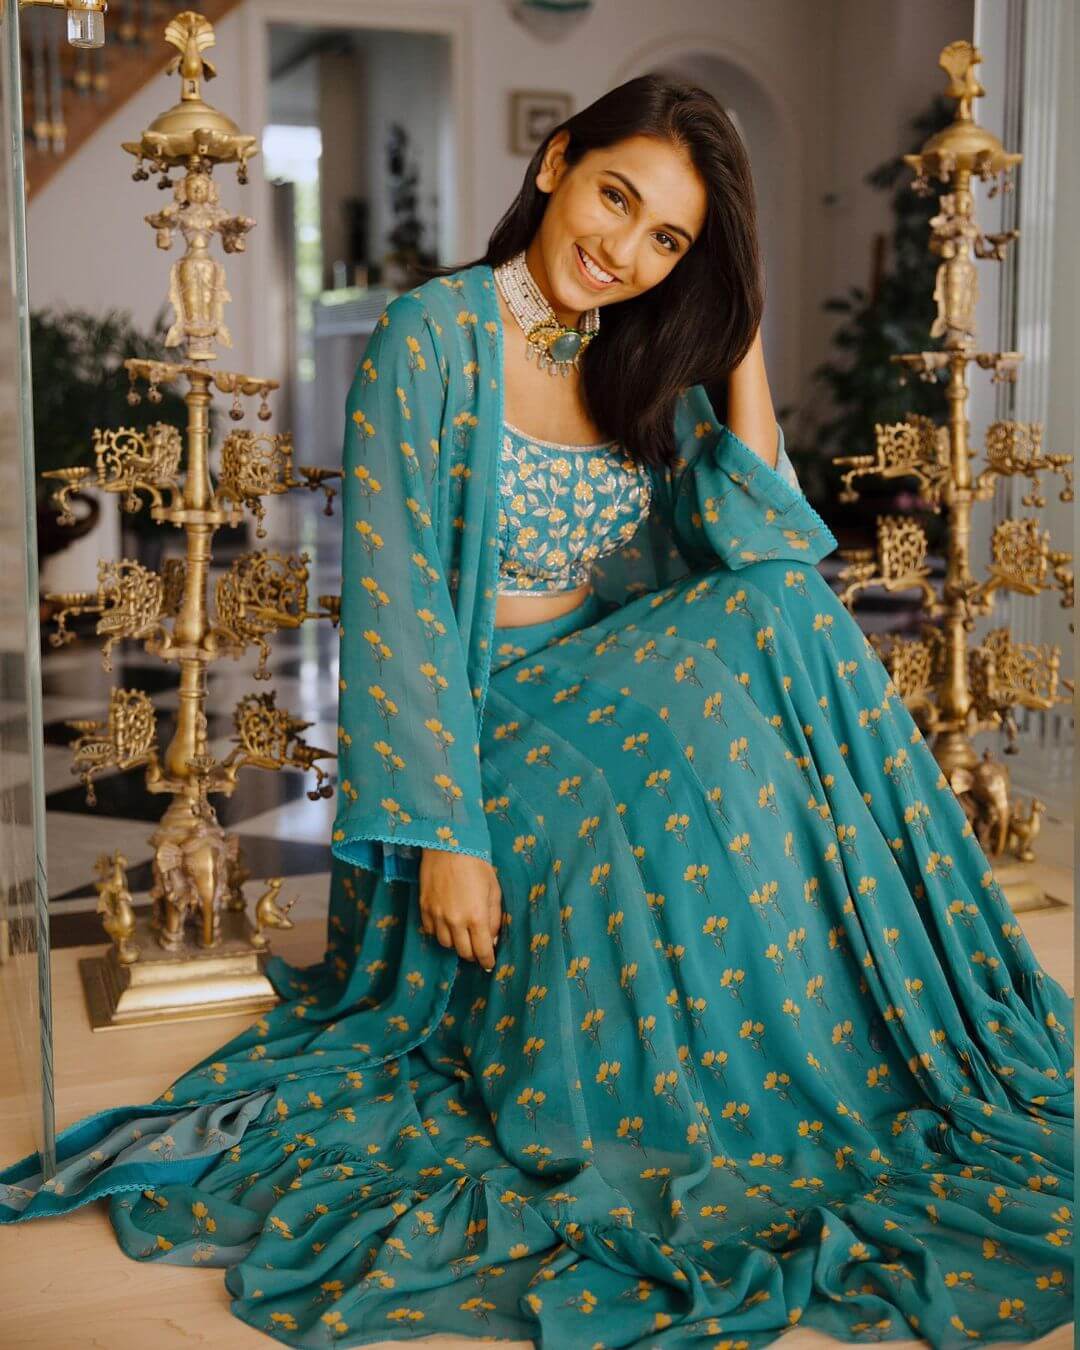 20+ Trending Diwali Outfit Ideas for you to choose from Subtle Indigo Lehenga for an Elegant touch